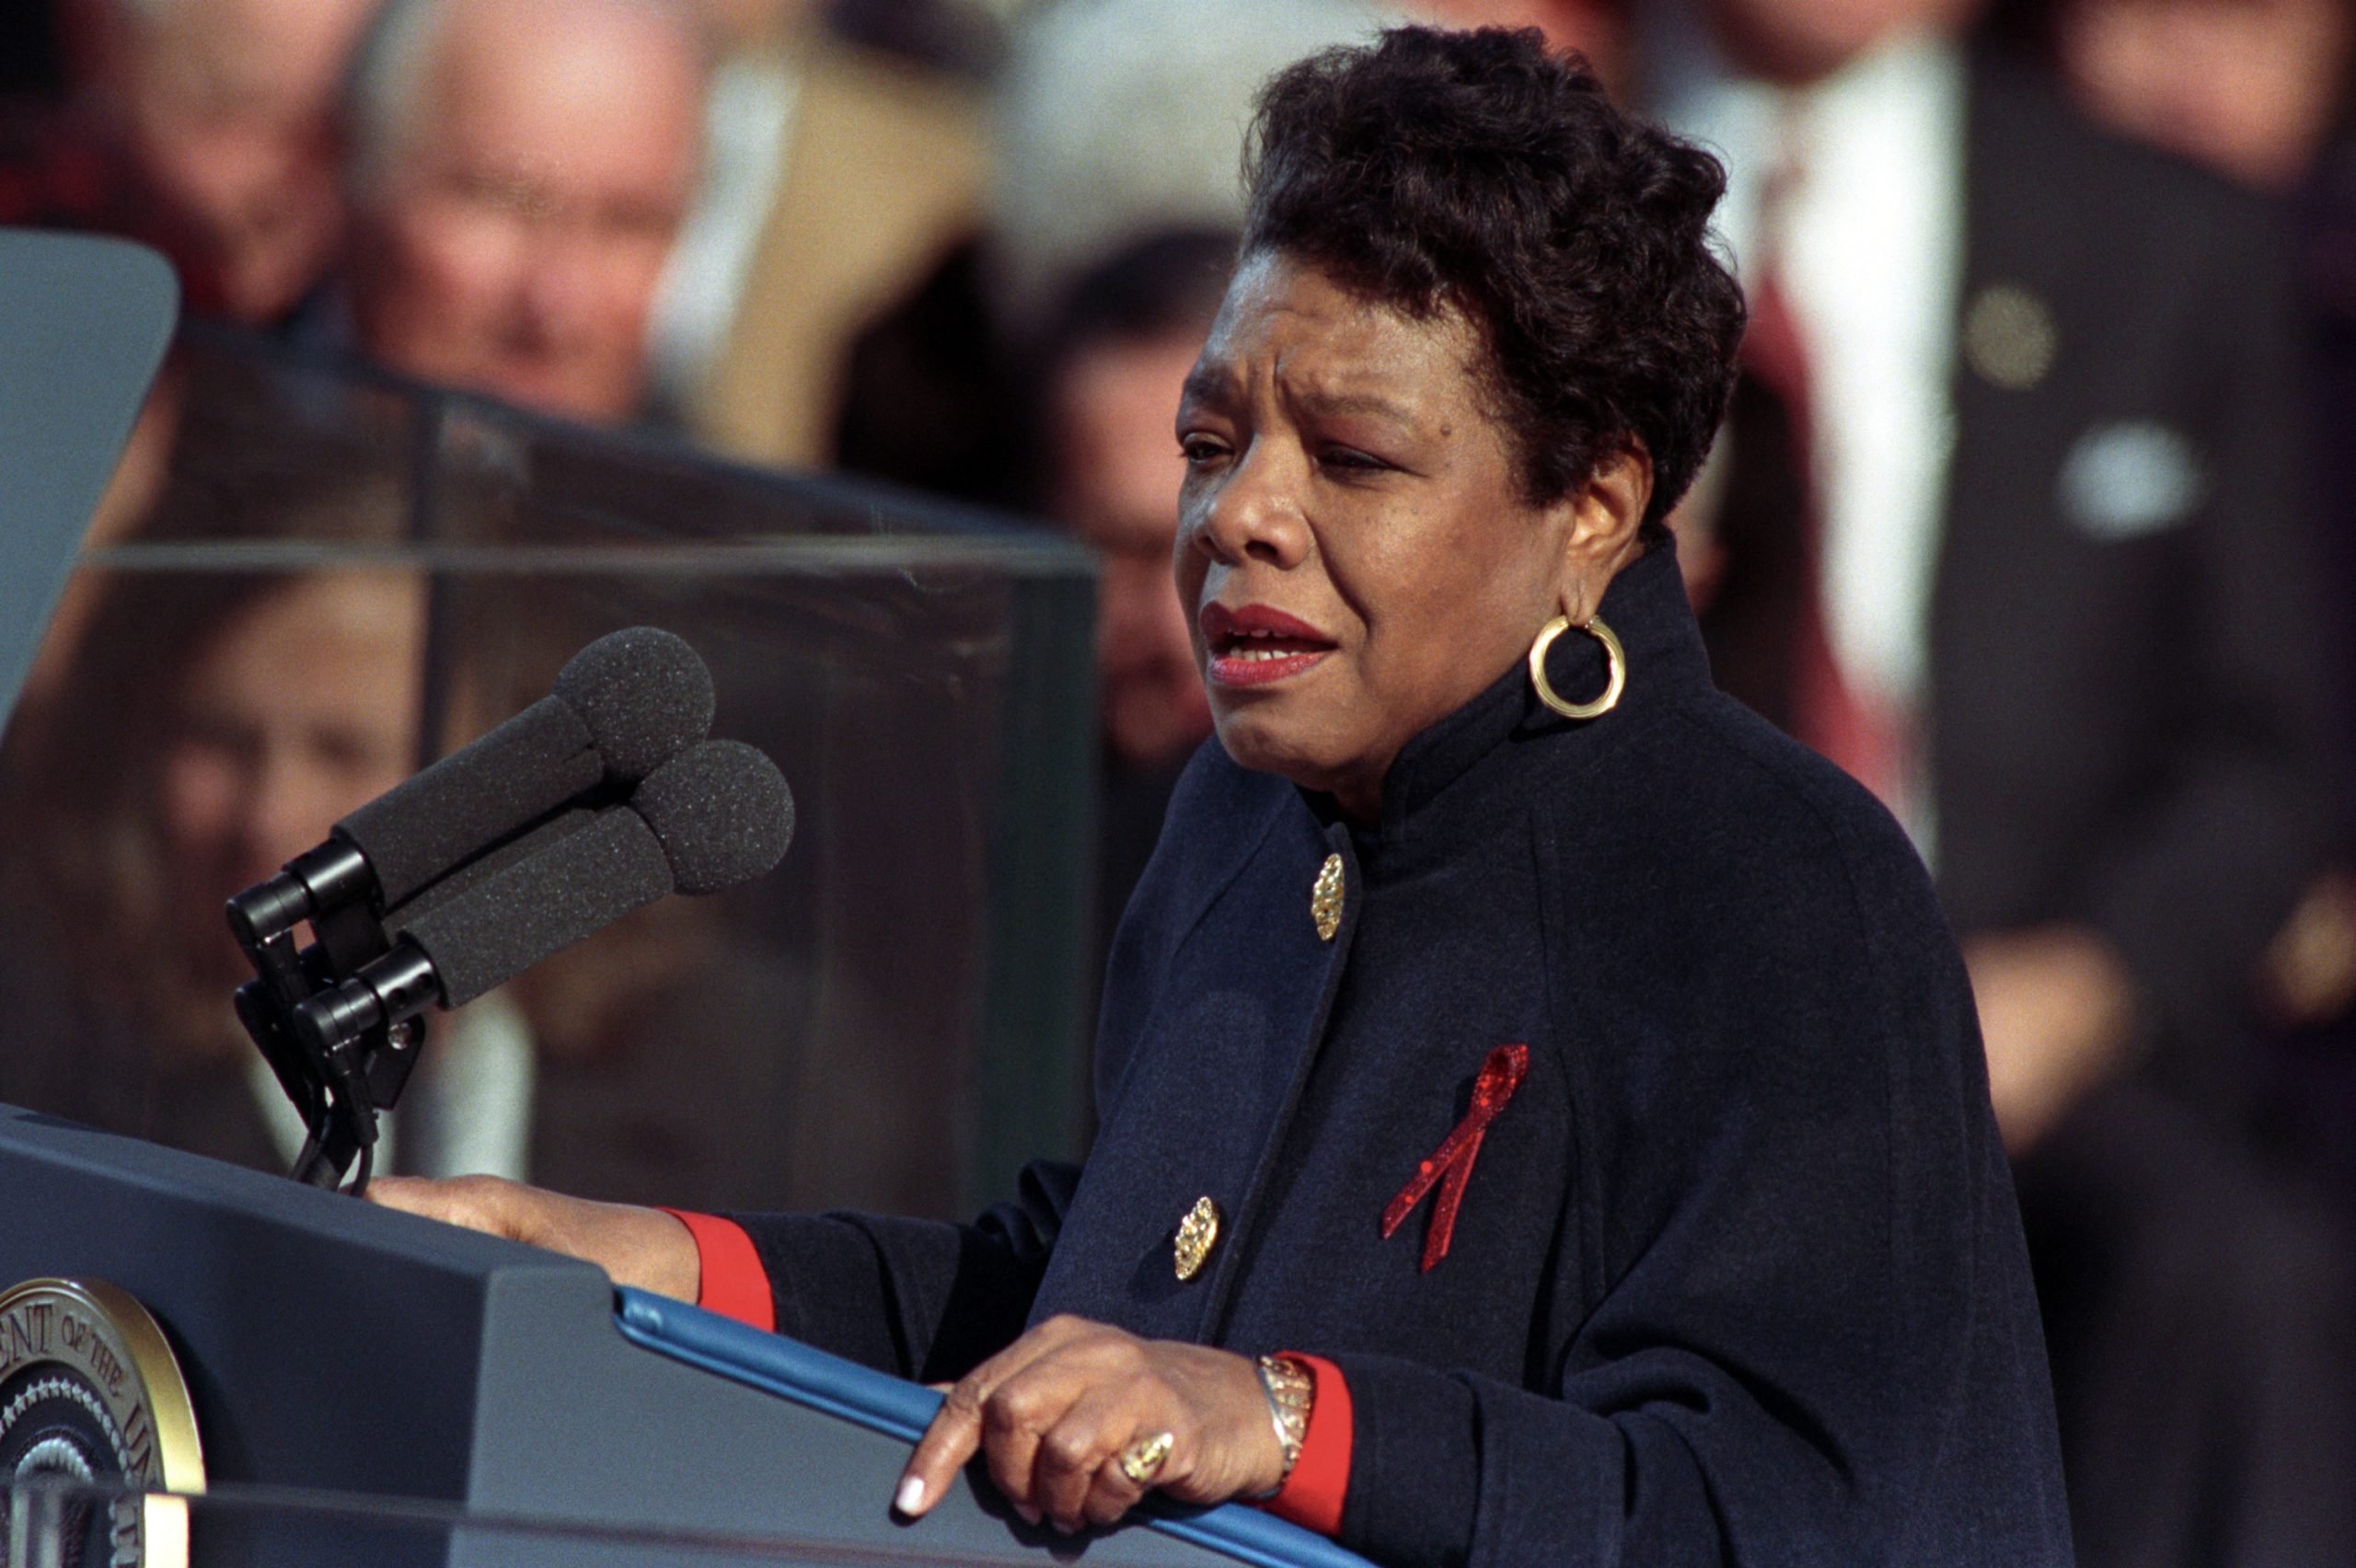 Maya Angelou reciting her poem "In the pulse of the morning" during the inauguration of President Bill Clinton in 1993.